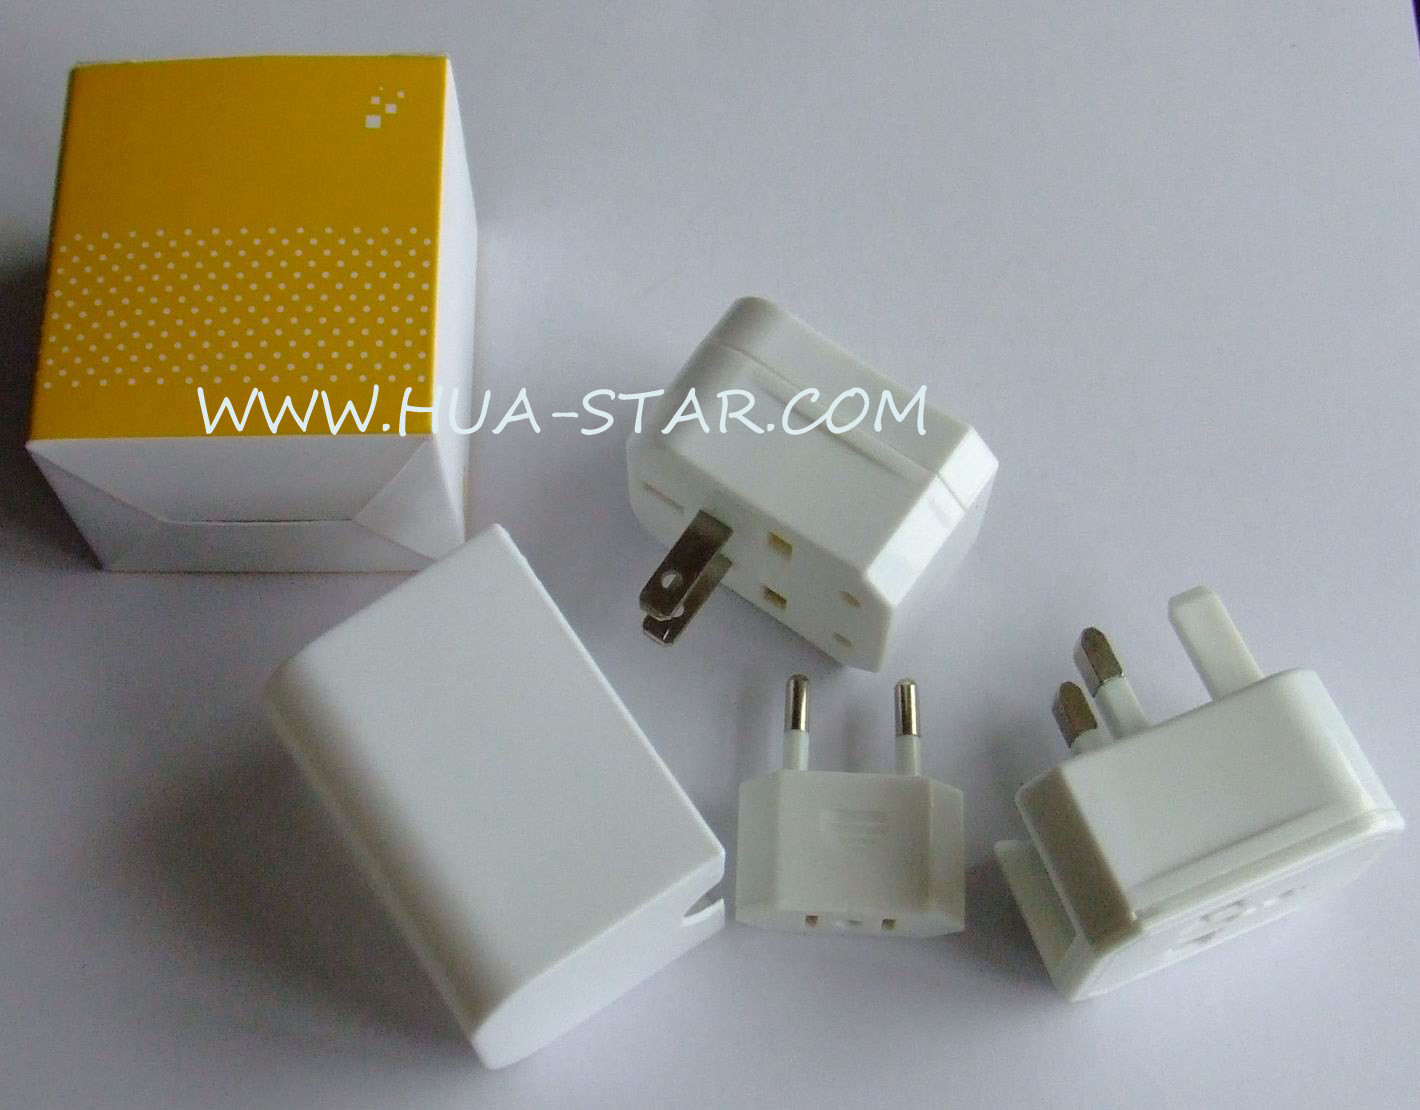 Travel Adapter as Promotional/Promotion Gift